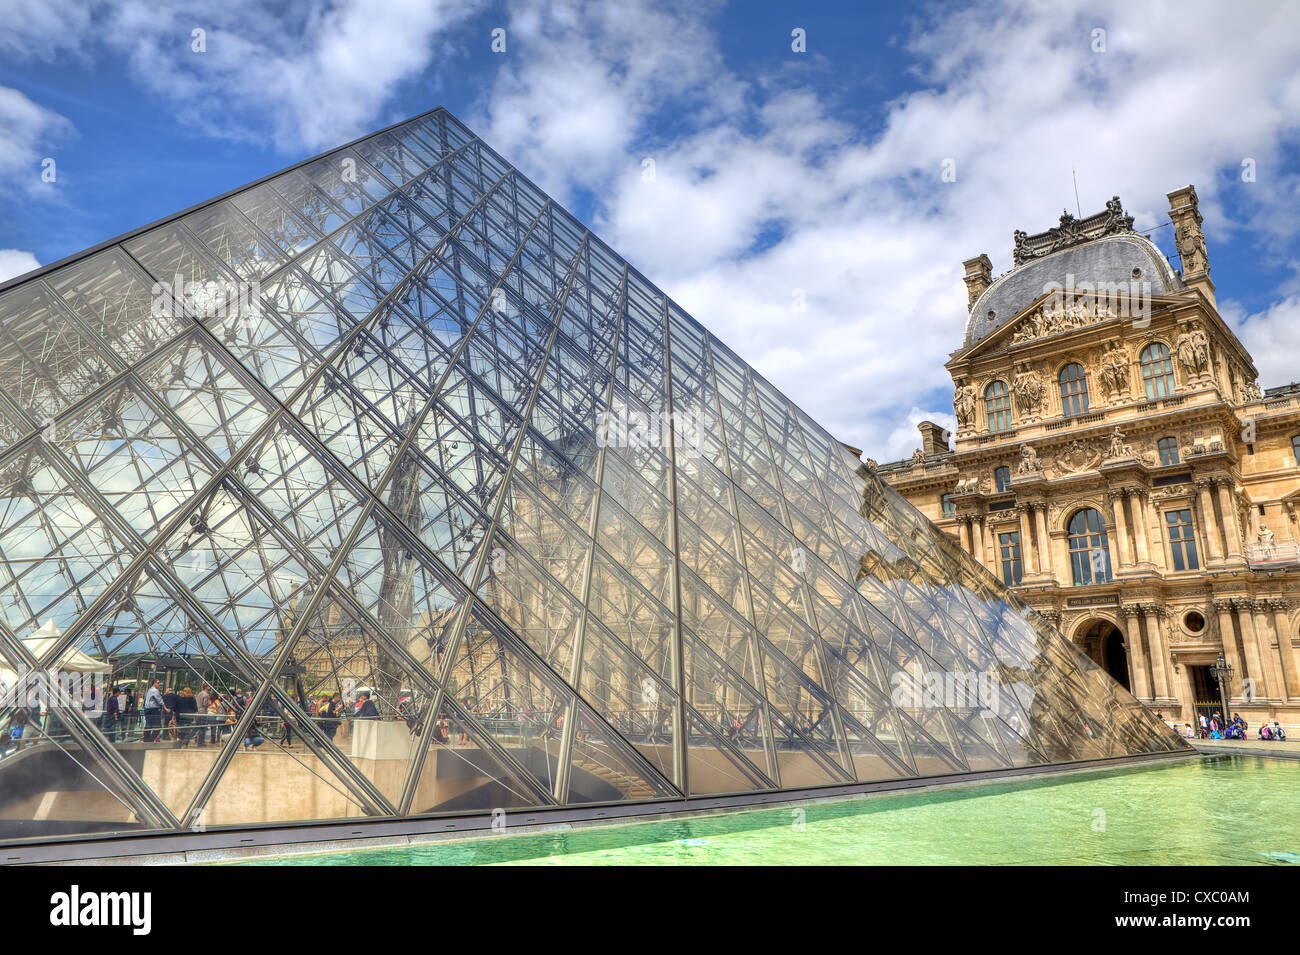 Famous glass Pyramid and Louvre Museum (former Royal Palace) on background in Paris, France. Stock Photo